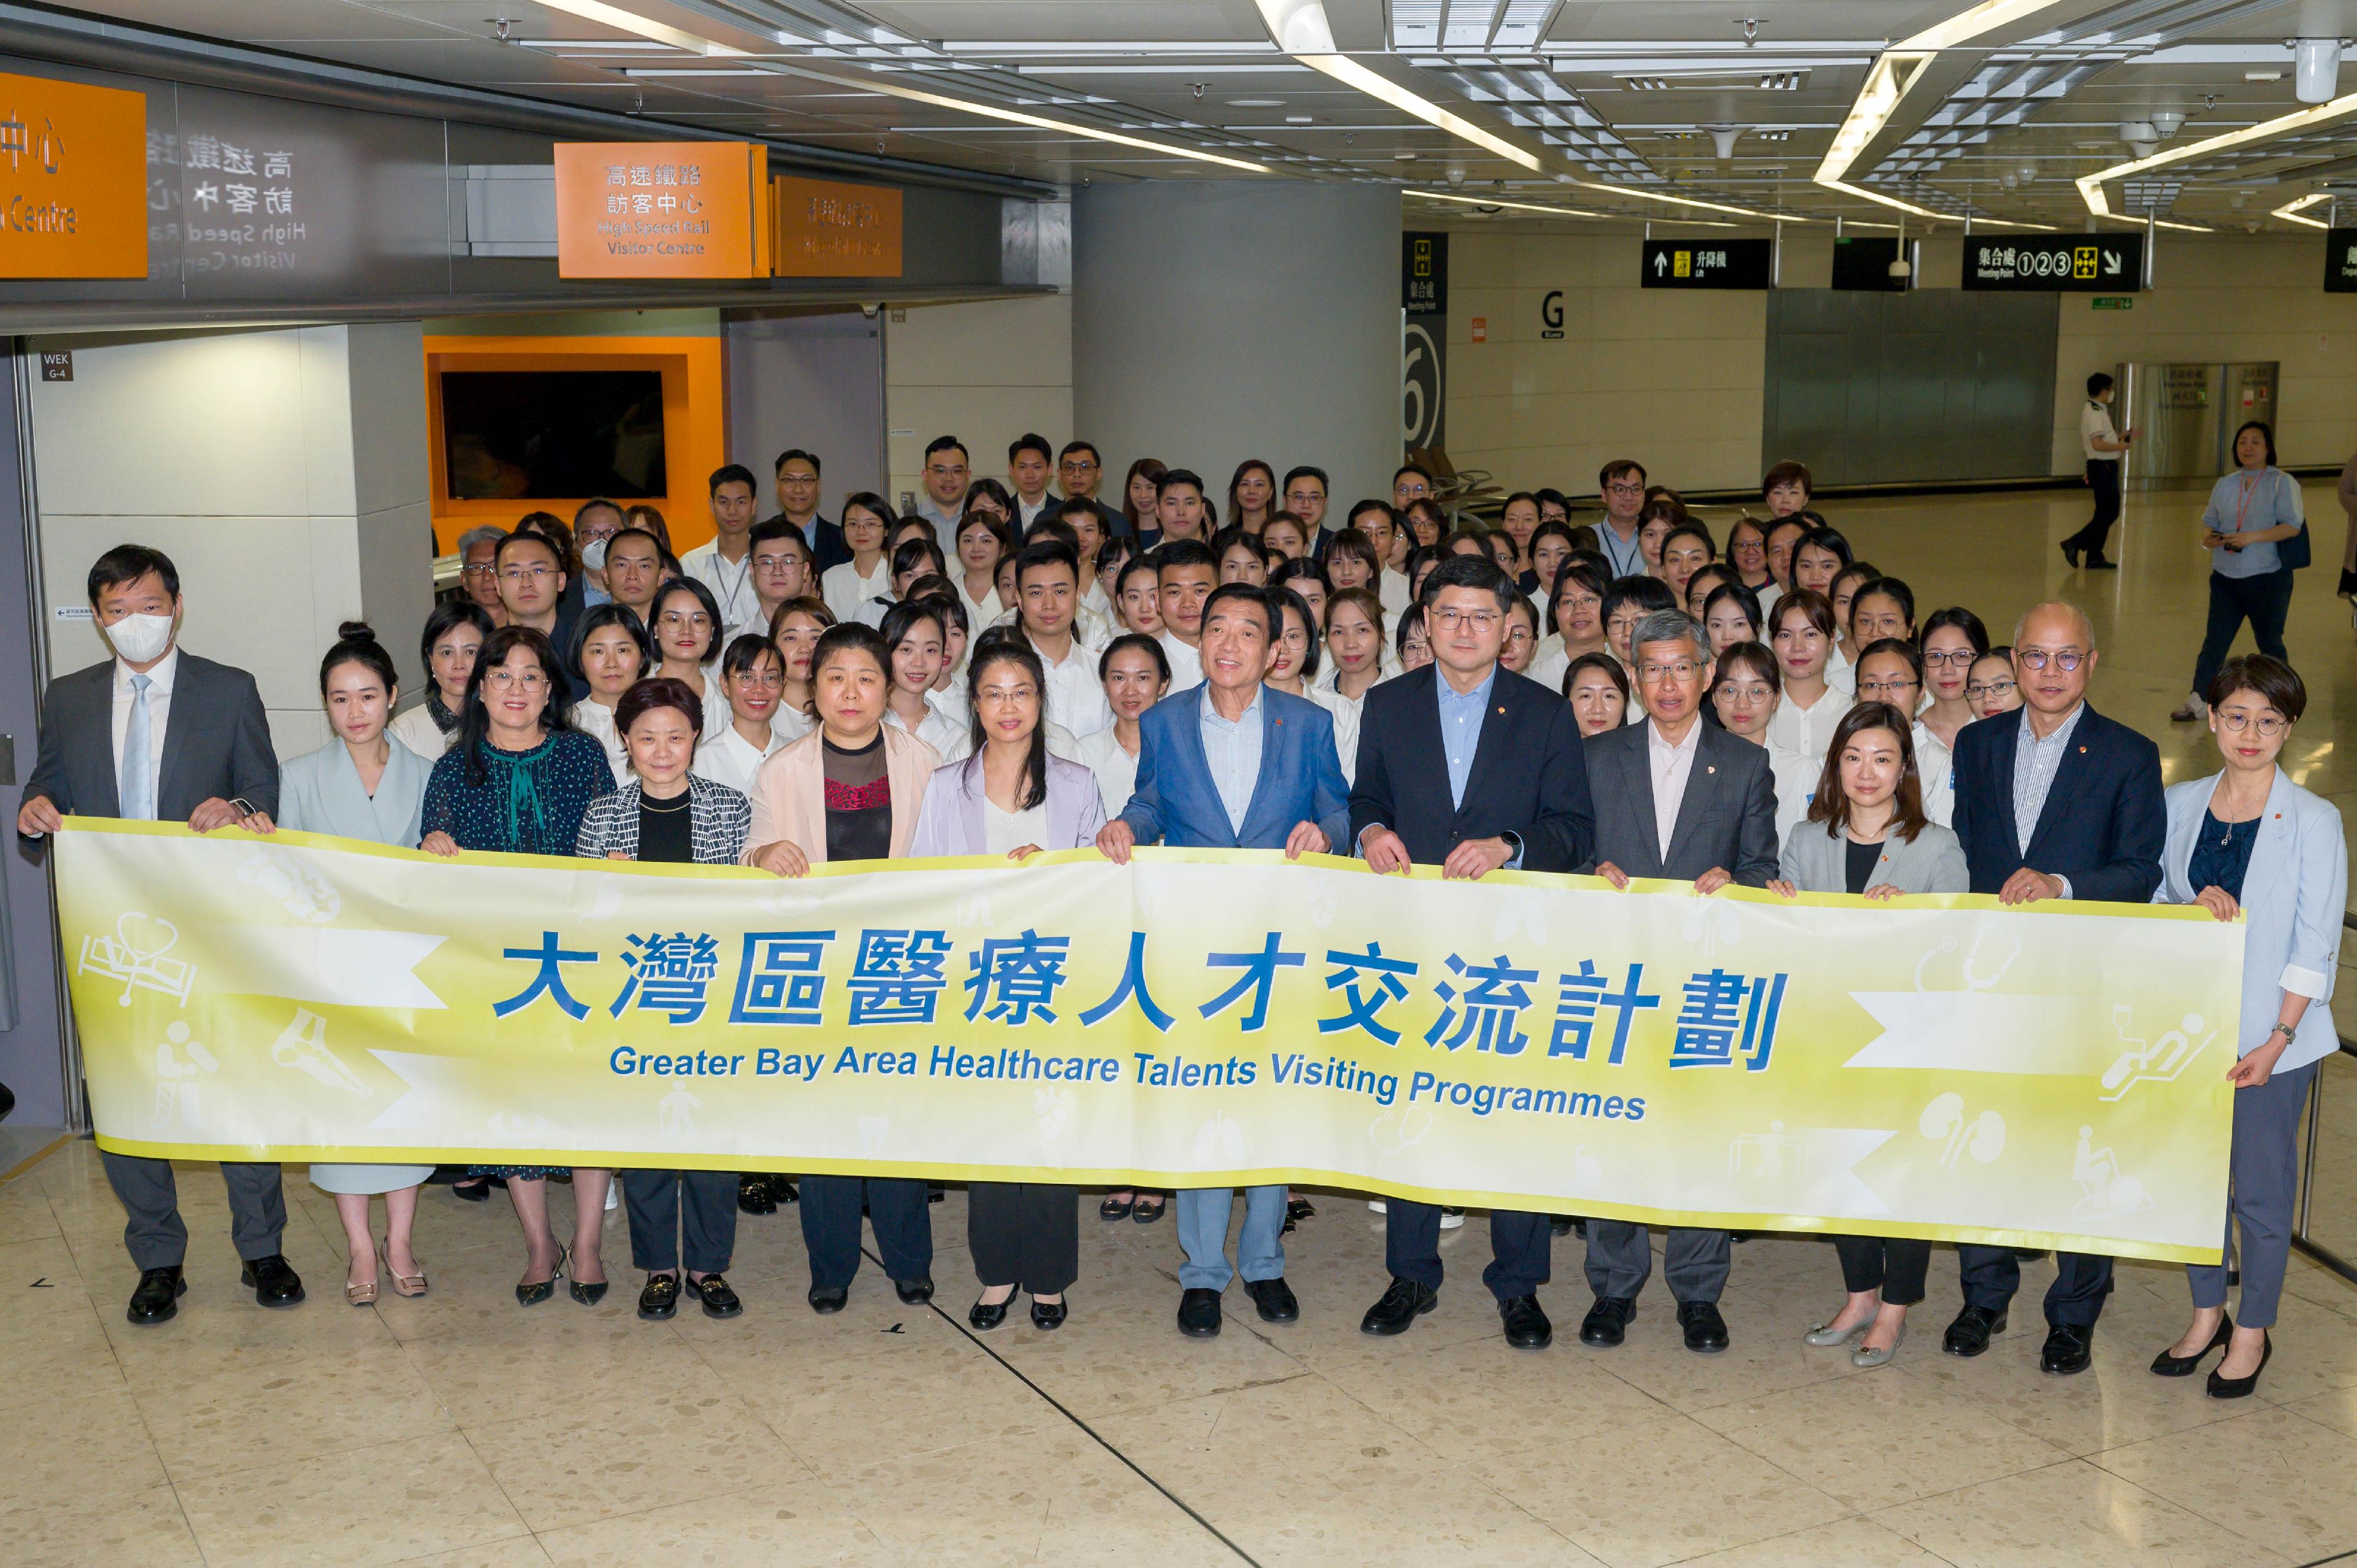 The Chairman of the Hospital Authority (HA), Mr Henry Fan (first row, sixth right), the Chief Executive of the HA, Dr Tony Ko (first row, fifth right), and HA representatives welcomed the arrival of around 80 healthcare professionals from Guangdong Province, including the Health Commission of Guangdong Province Representative, Ms Yang Bo (first row, sixth left), who are participating in Greater Bay Area Healthcare Talents Visiting Programmes. 